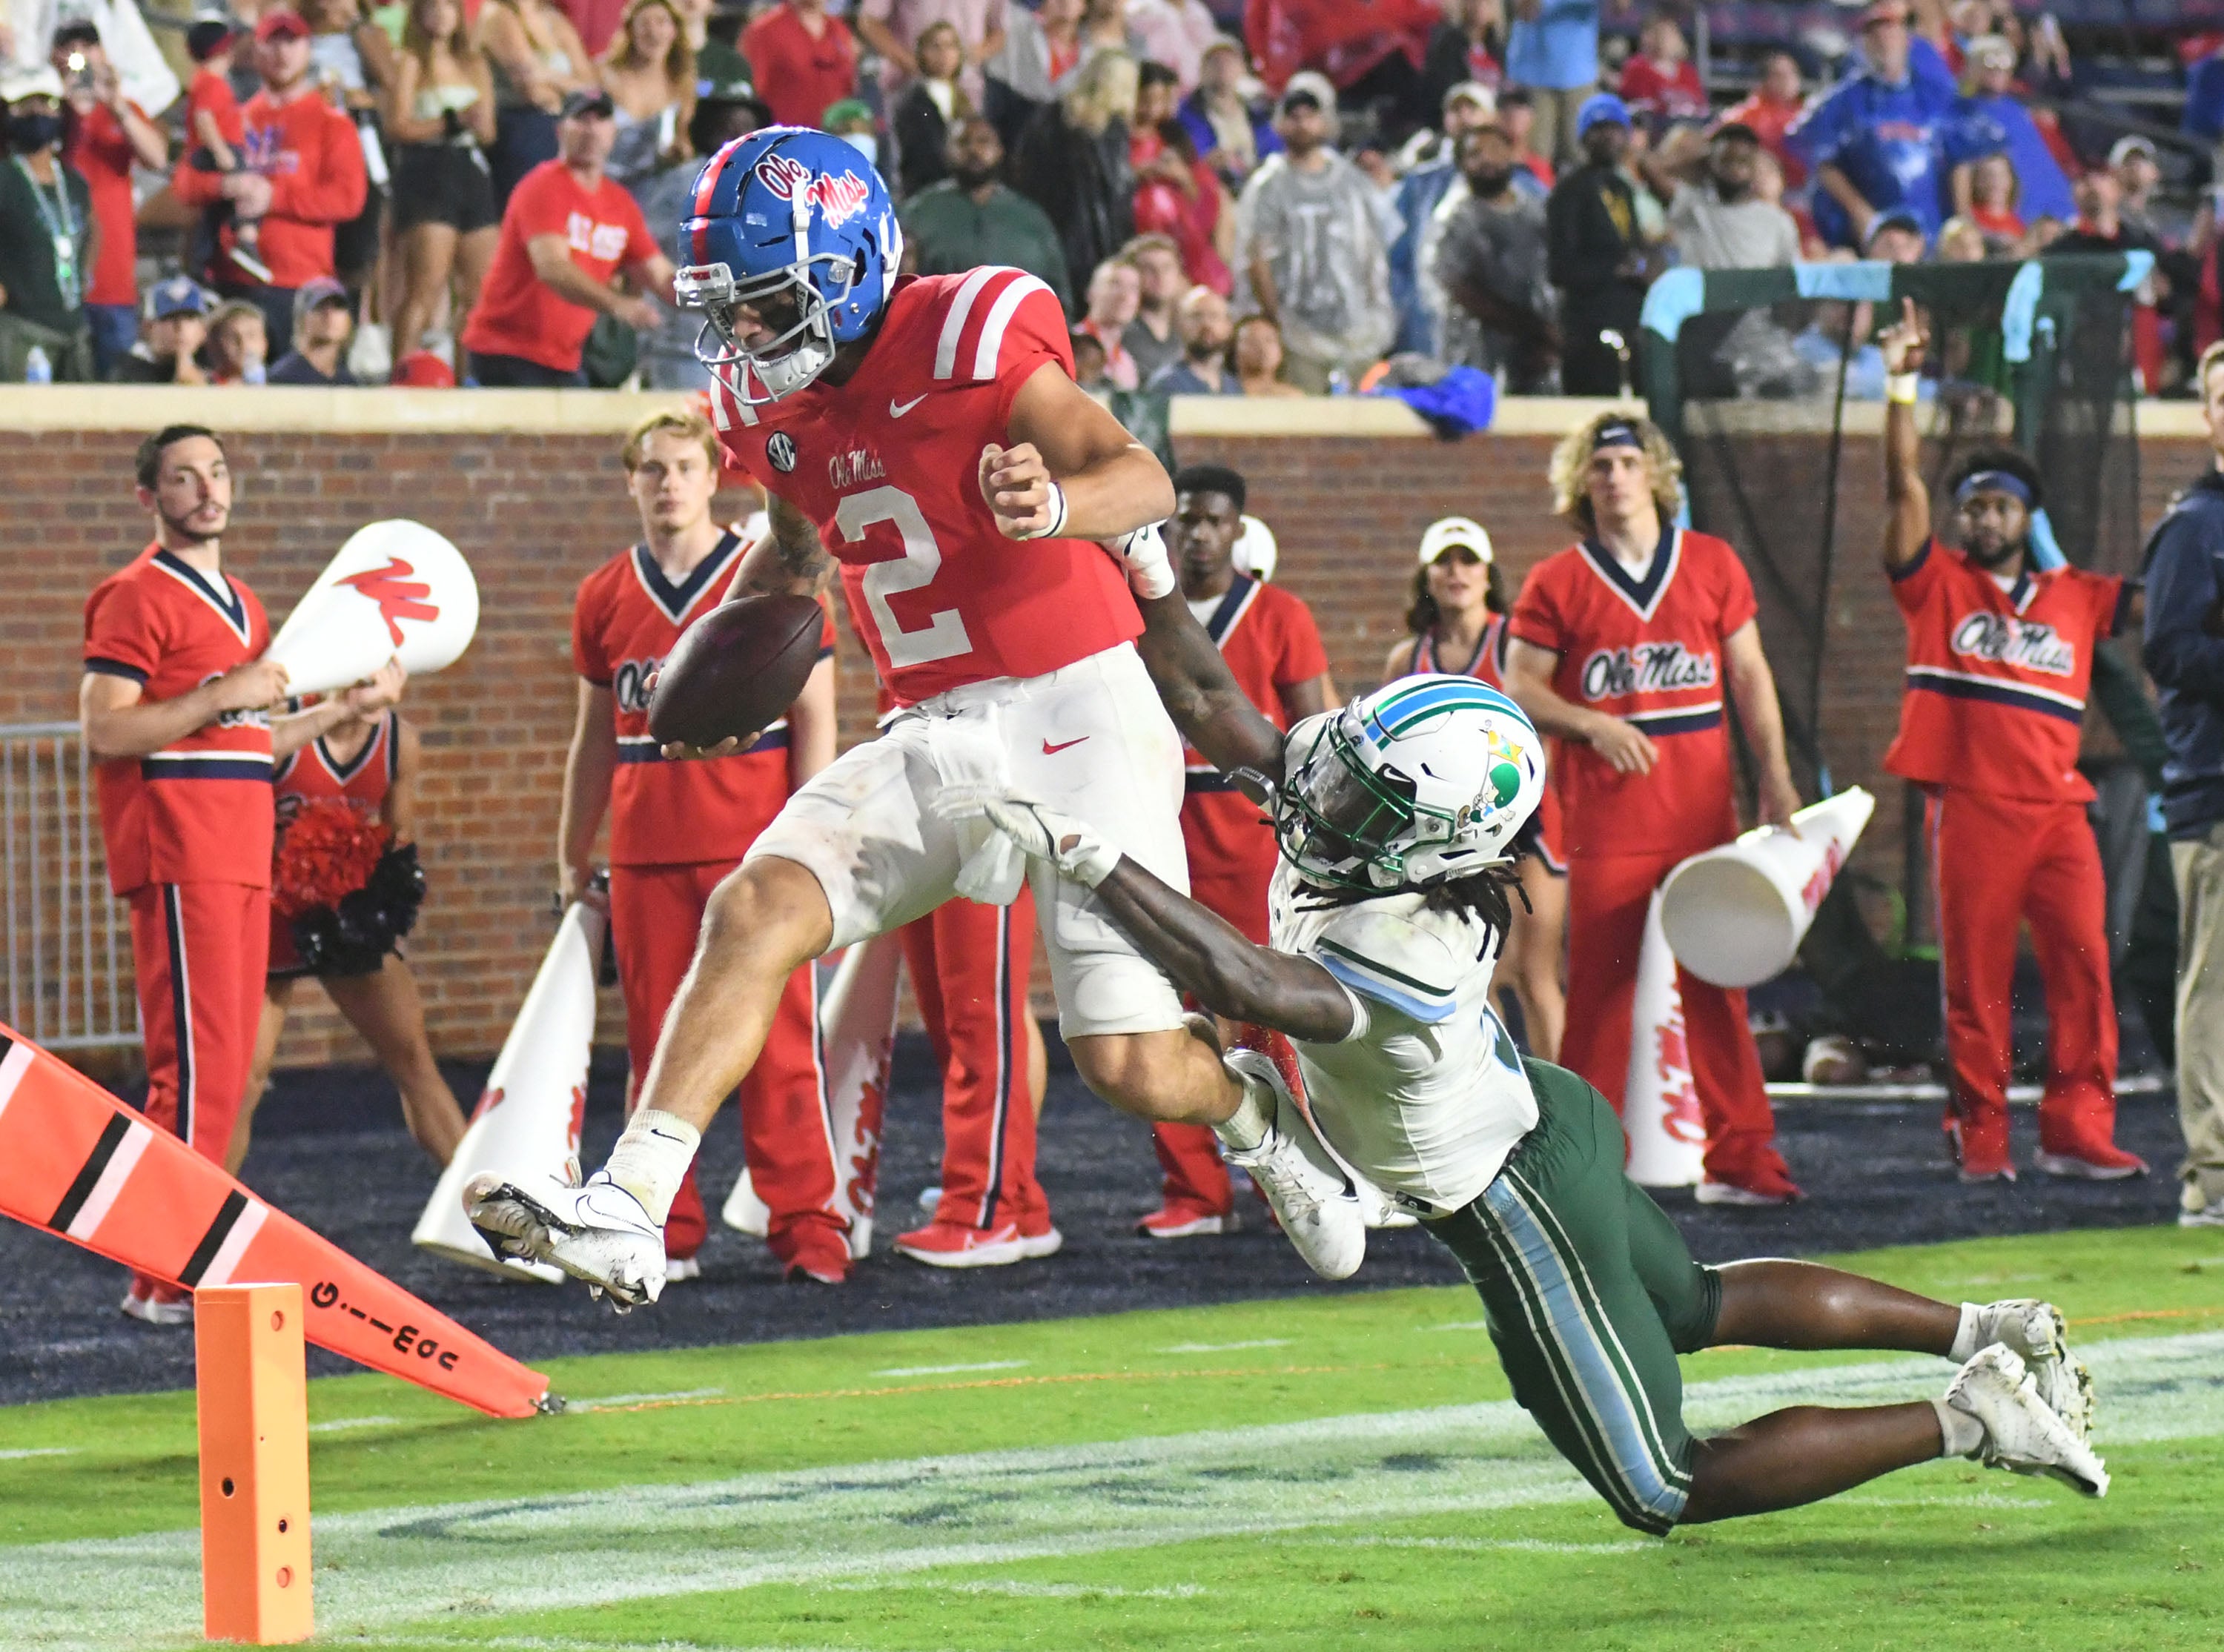 Matt Corral storms into Heisman contention as No. 17 Ole Miss rolls